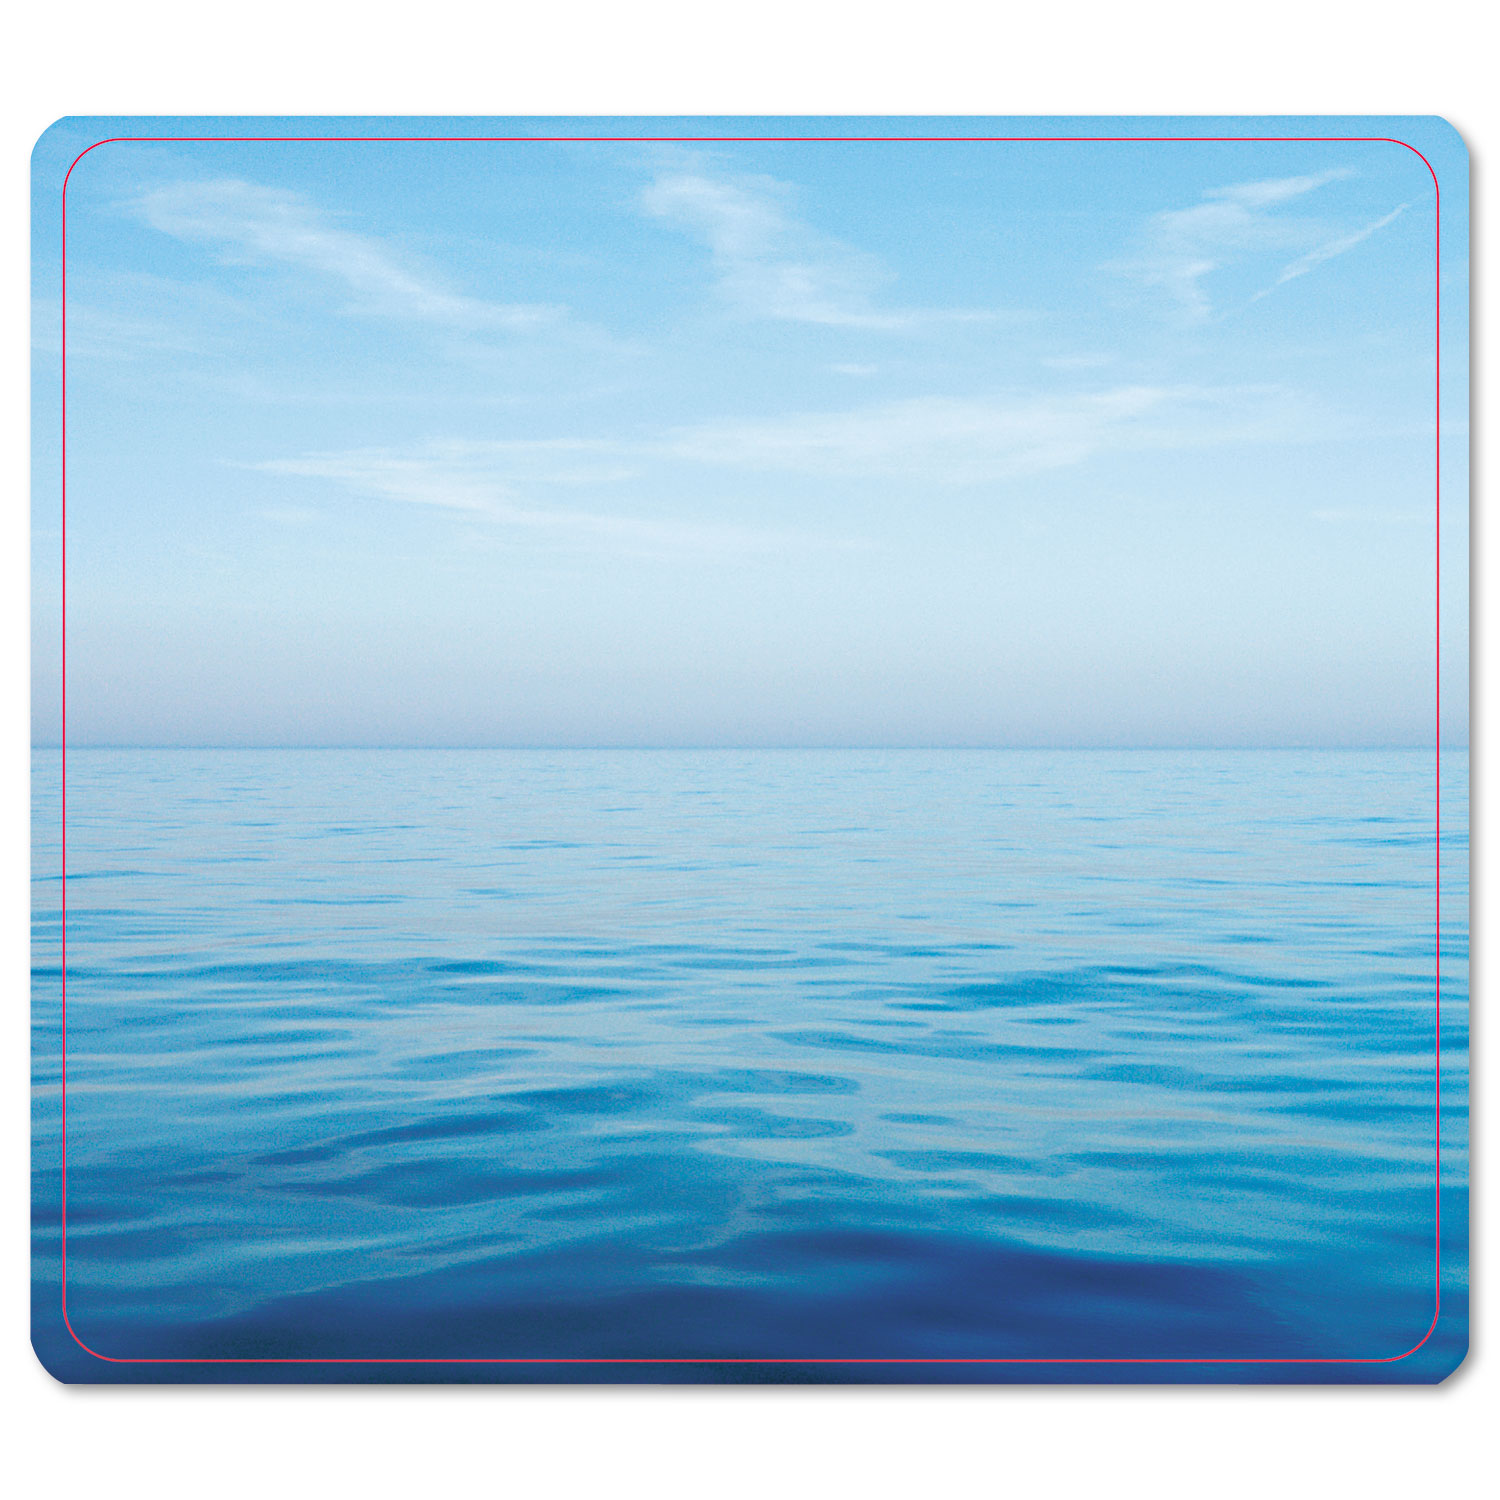  Fellowes 5903901 Recycled Mouse Pad, Nonskid Base, 7 1/2 x 9, Blue Ocean (FEL5903901) 